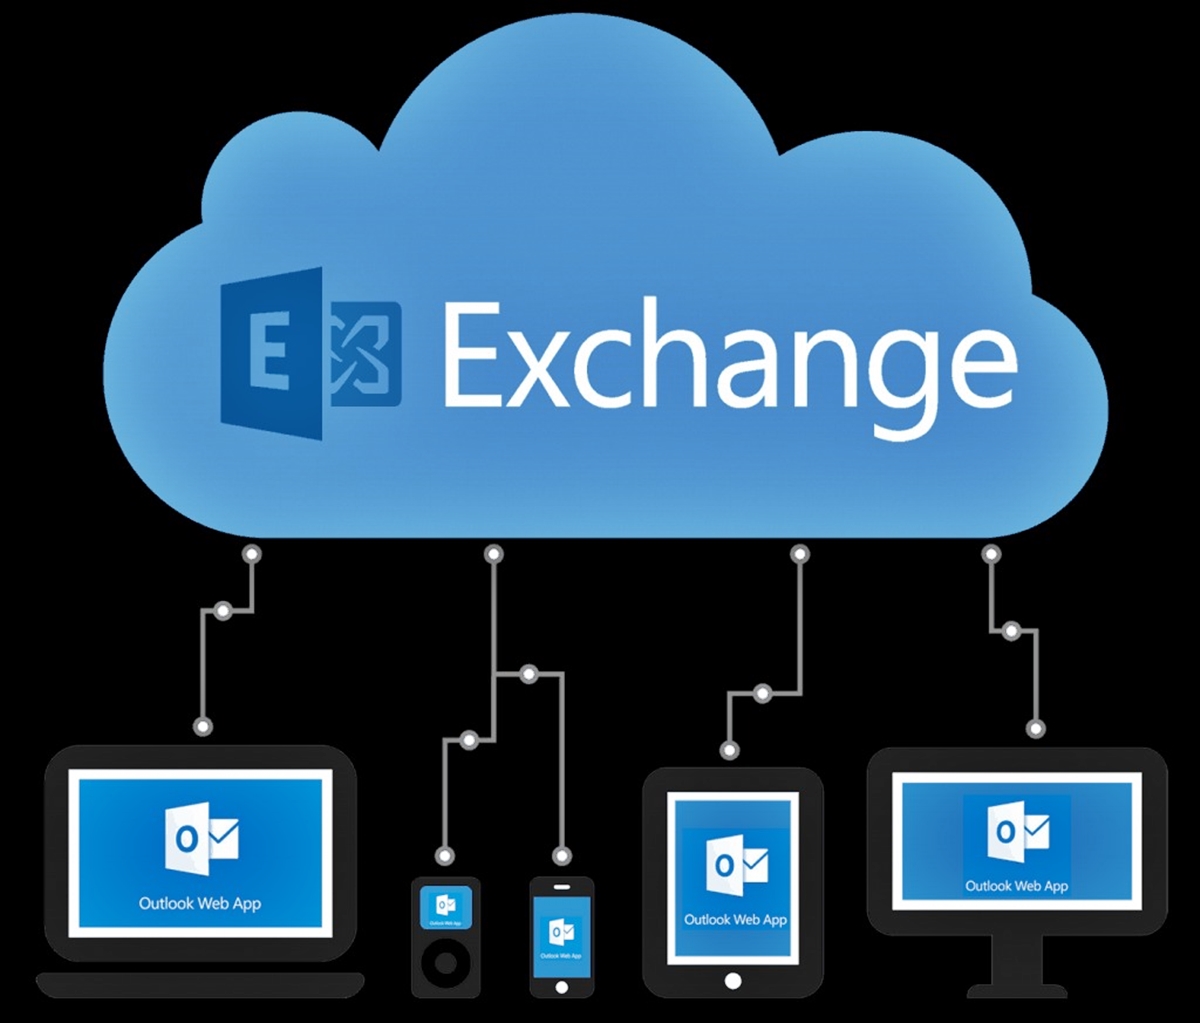 What Is Microsoft Exchange And How Does It Work?